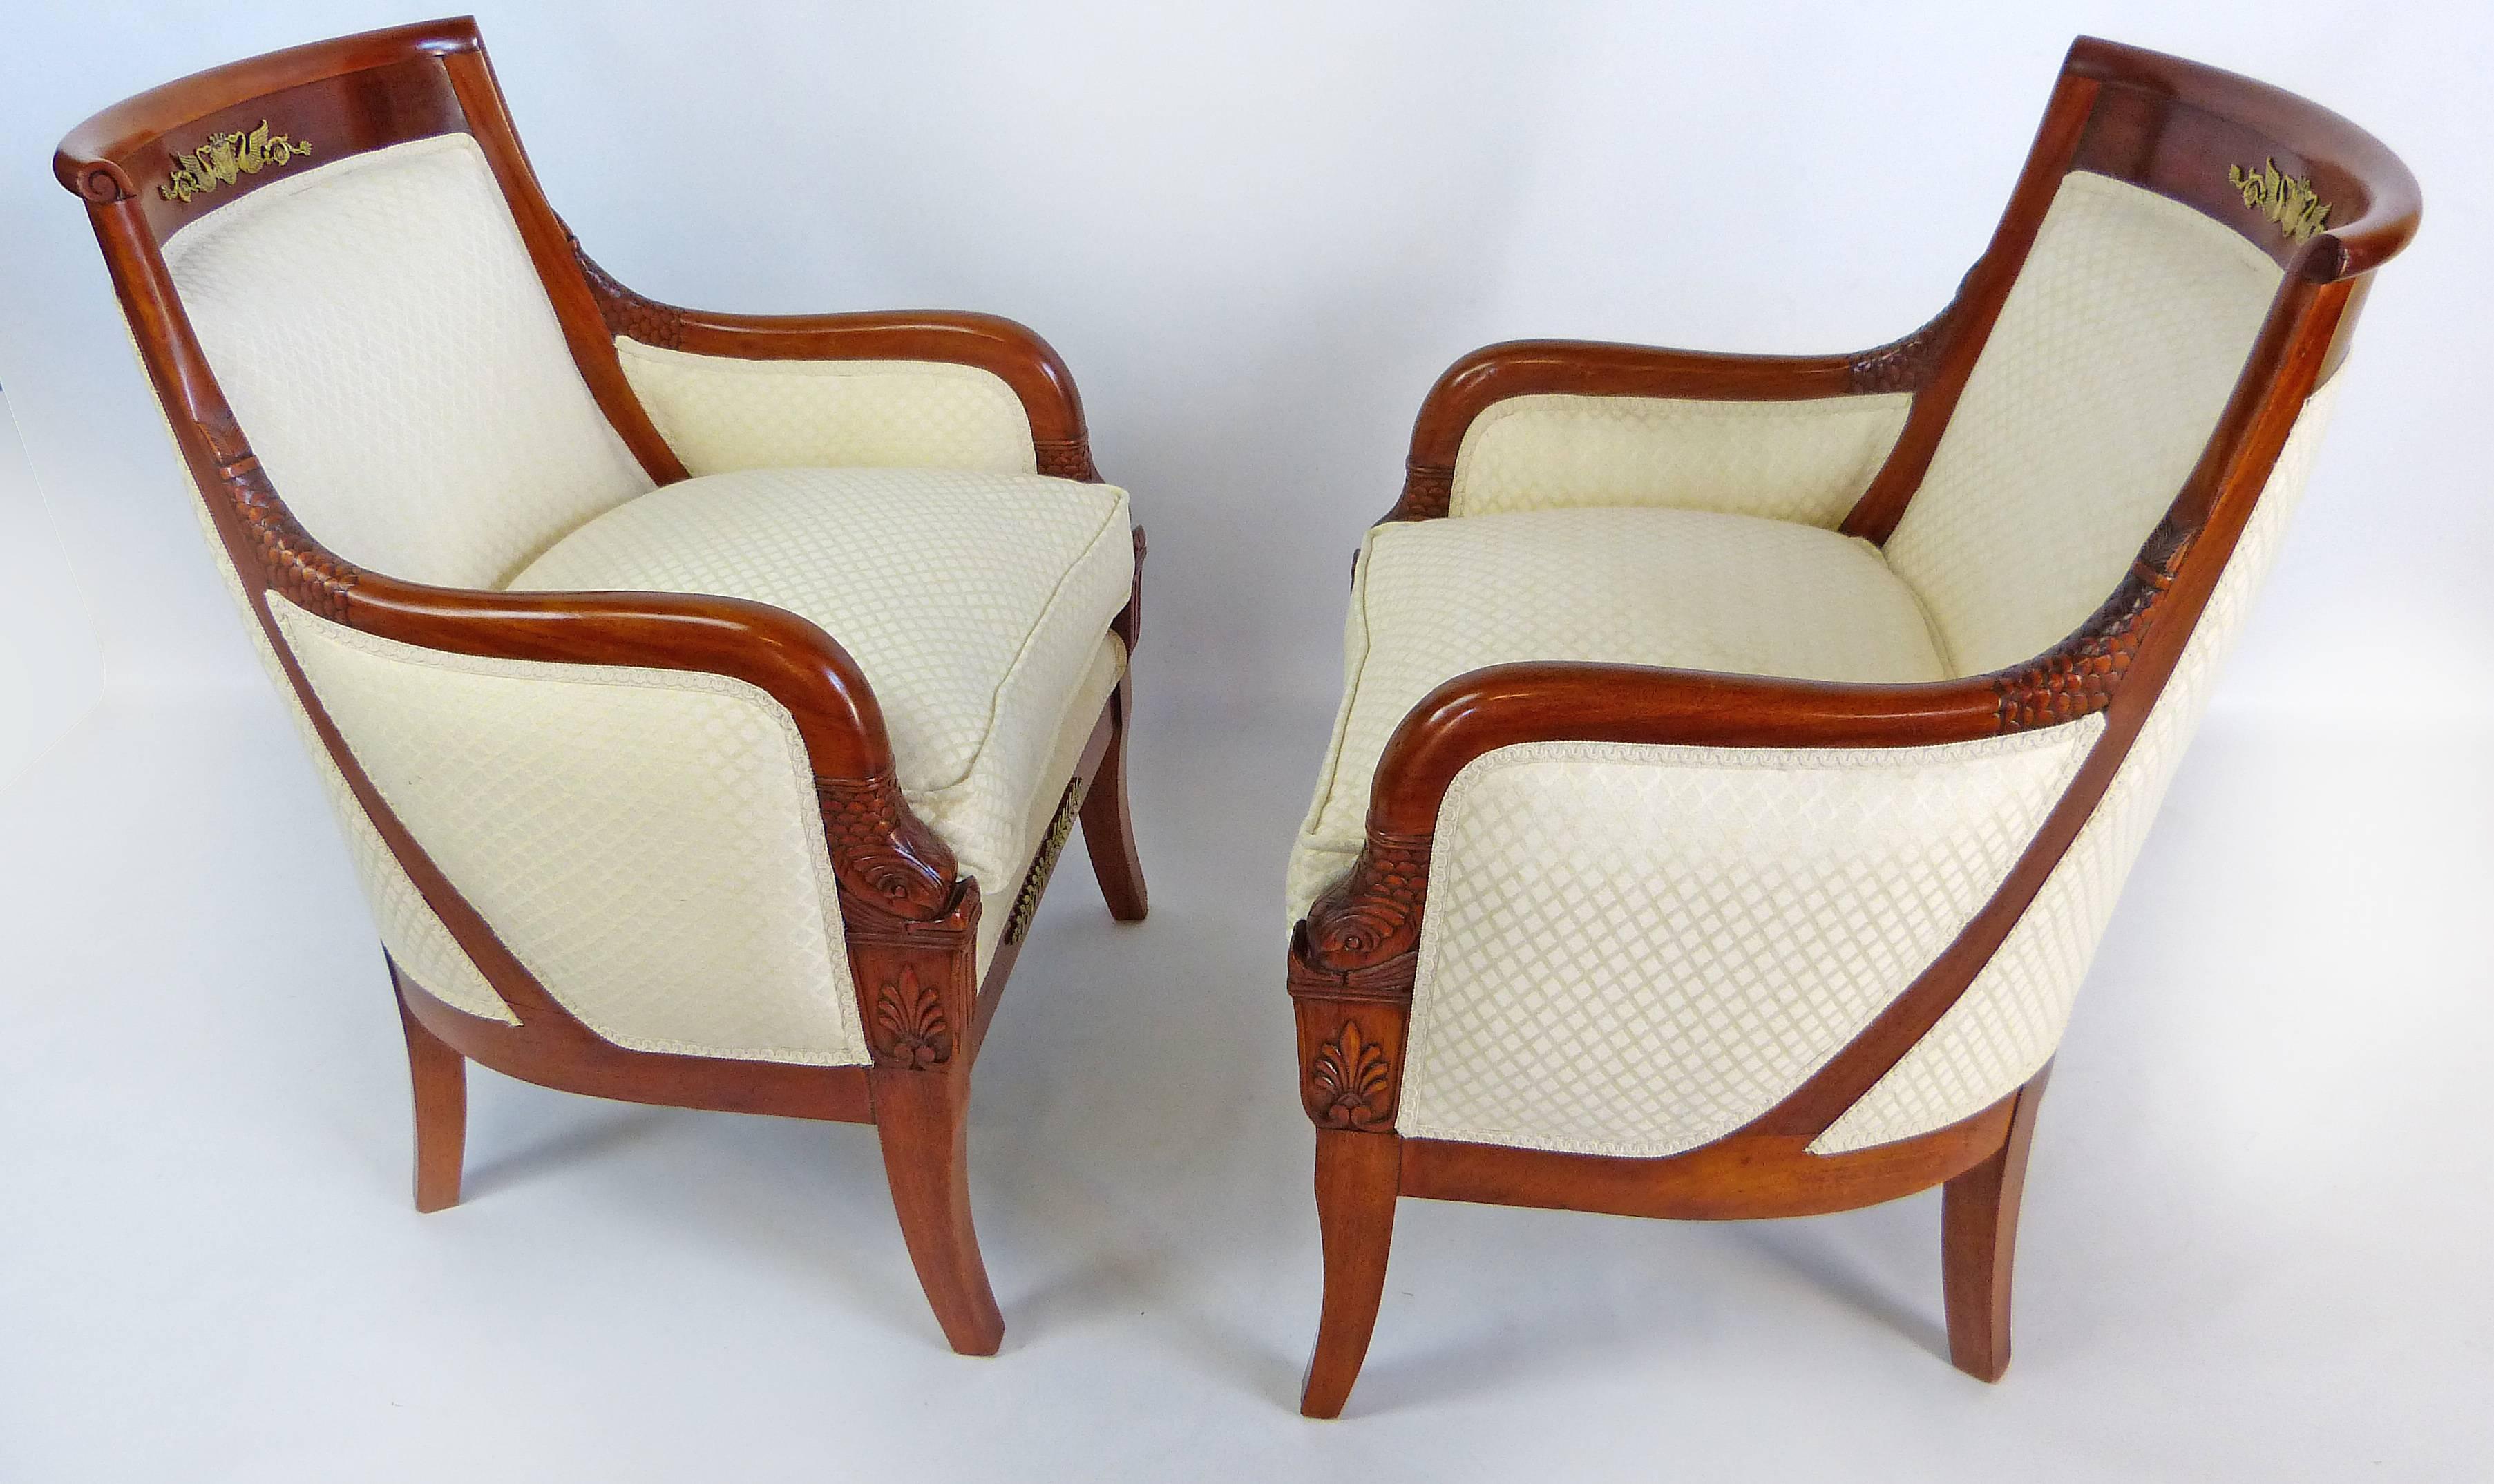 Fine pair of early 19th century Empire armchairs with round backs and pillowed seats. Made of solid mahogany they are sturdy and very comfortable. There is intricate and masterful carving at the top of the arms imitating fish scales and tail